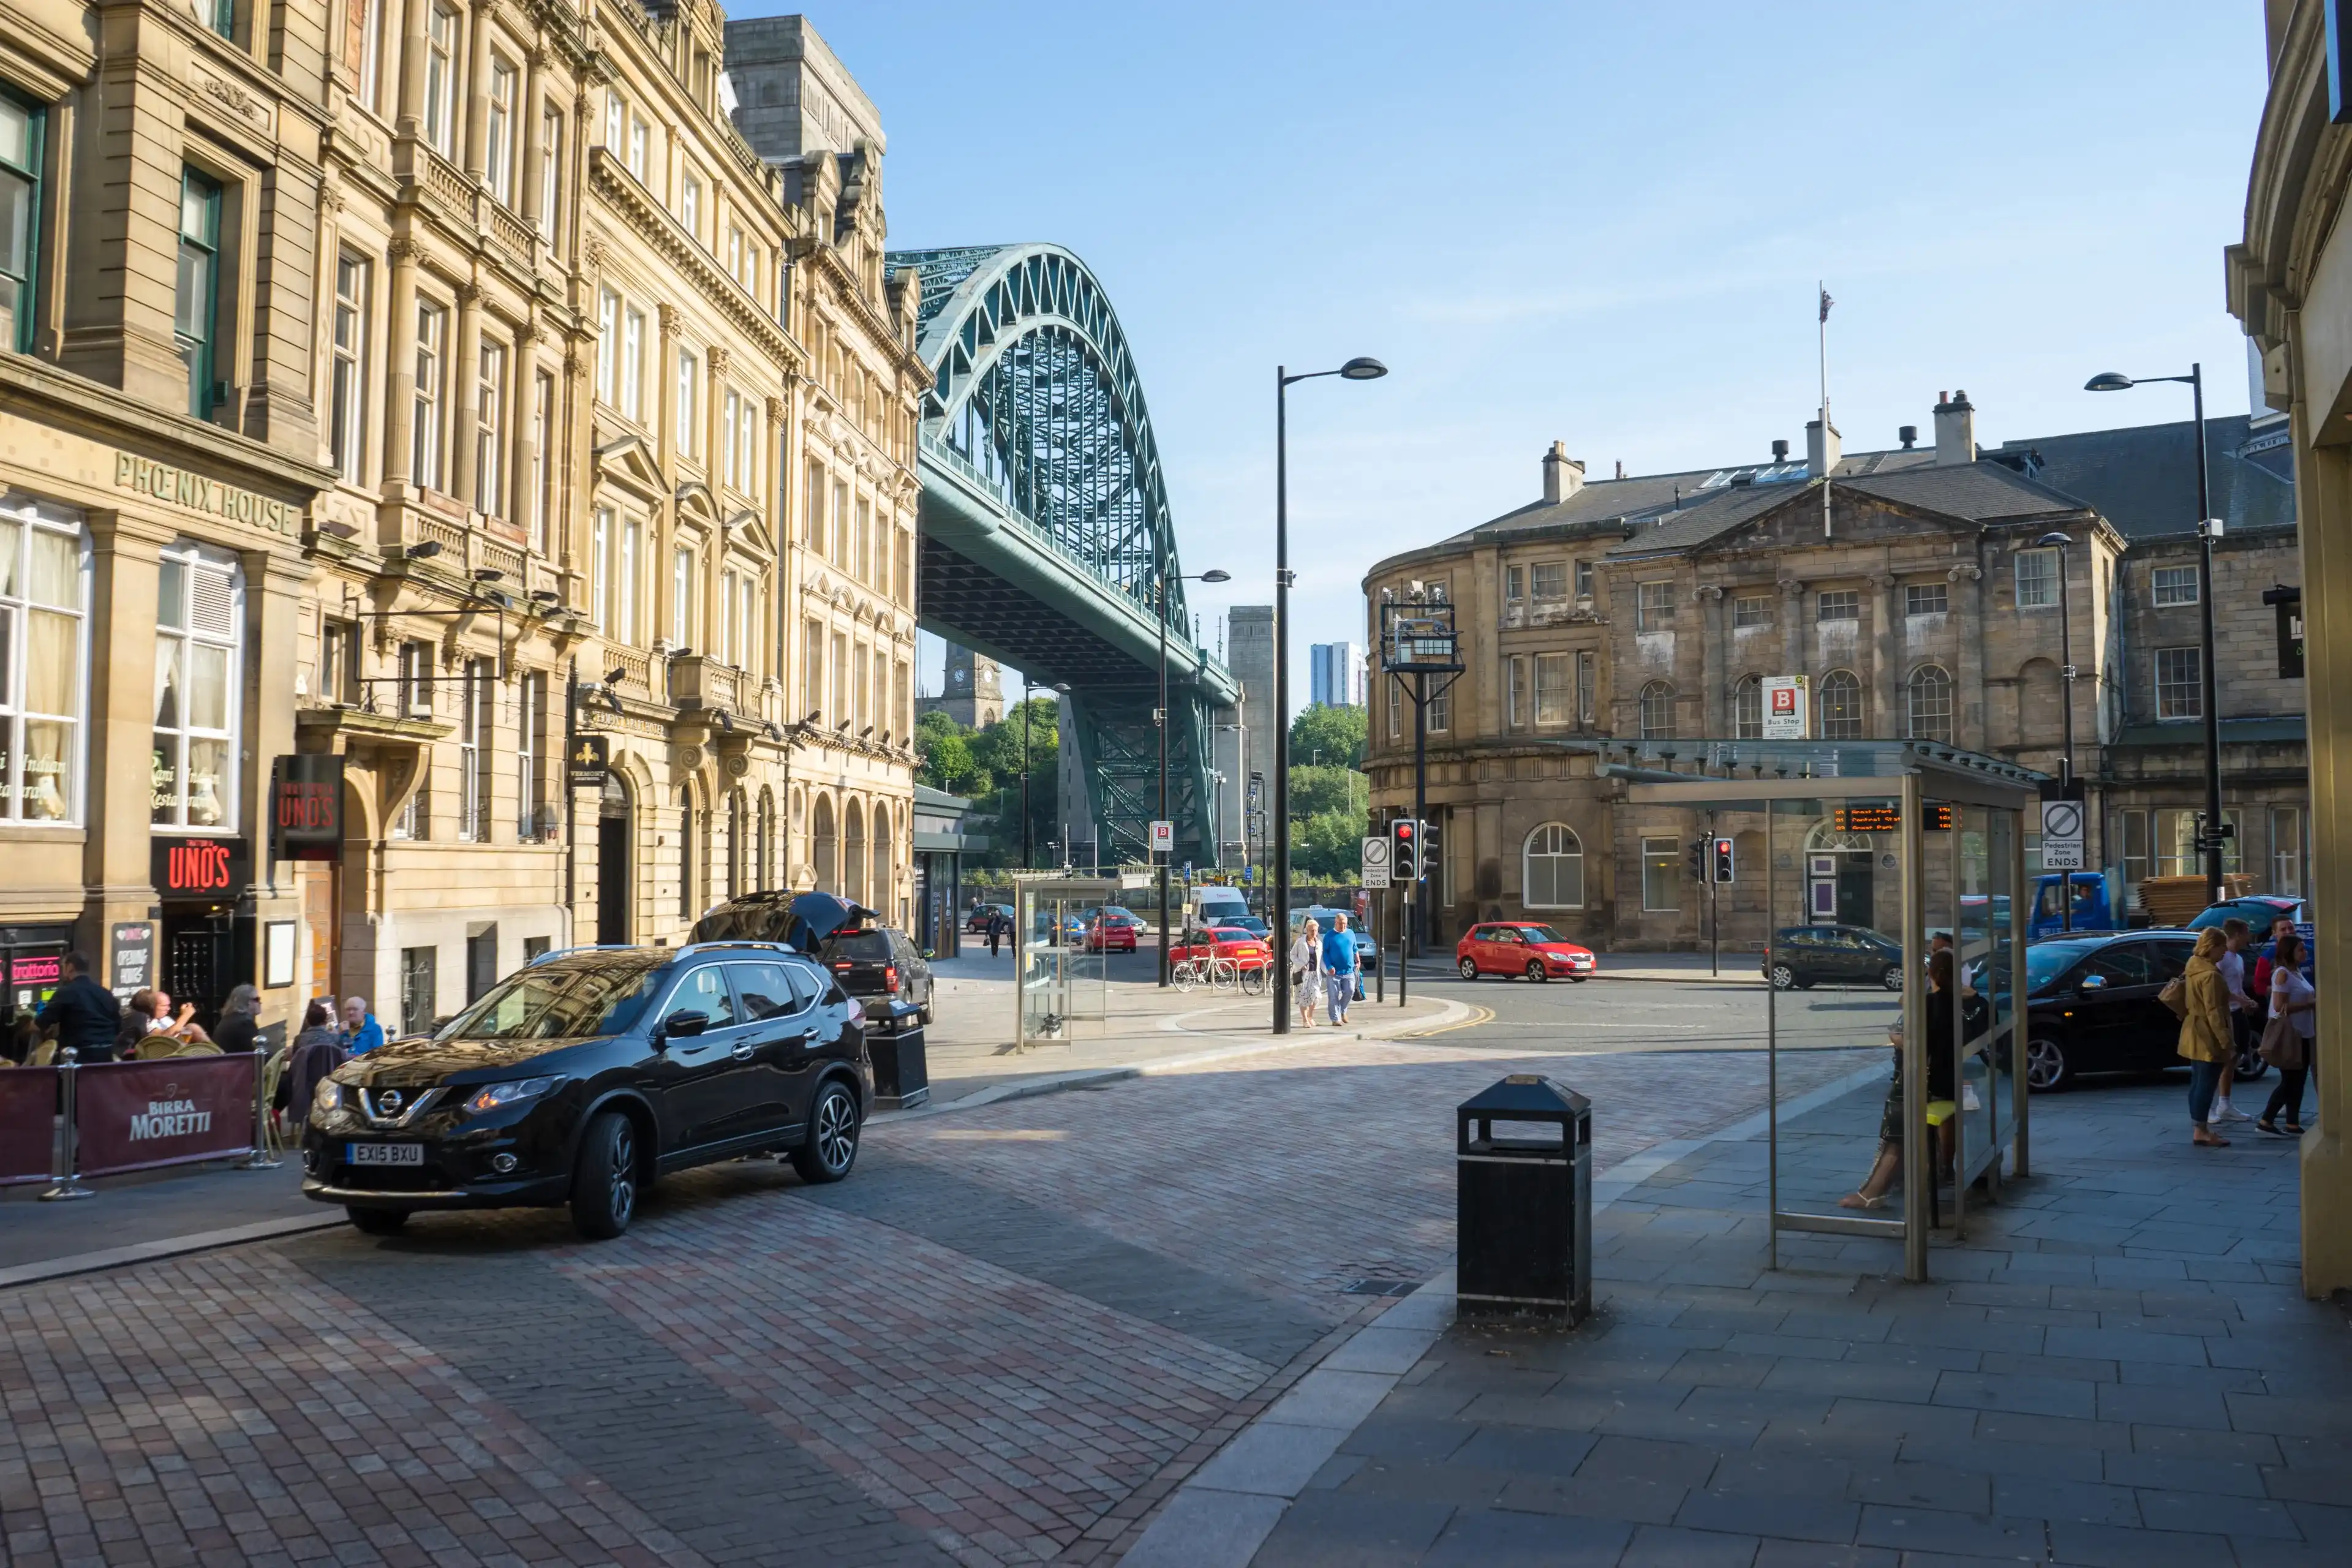 Best Newcastle upon Tyne hotels. Cheap hotels in Newcastle upon Tyne, United Kingdom